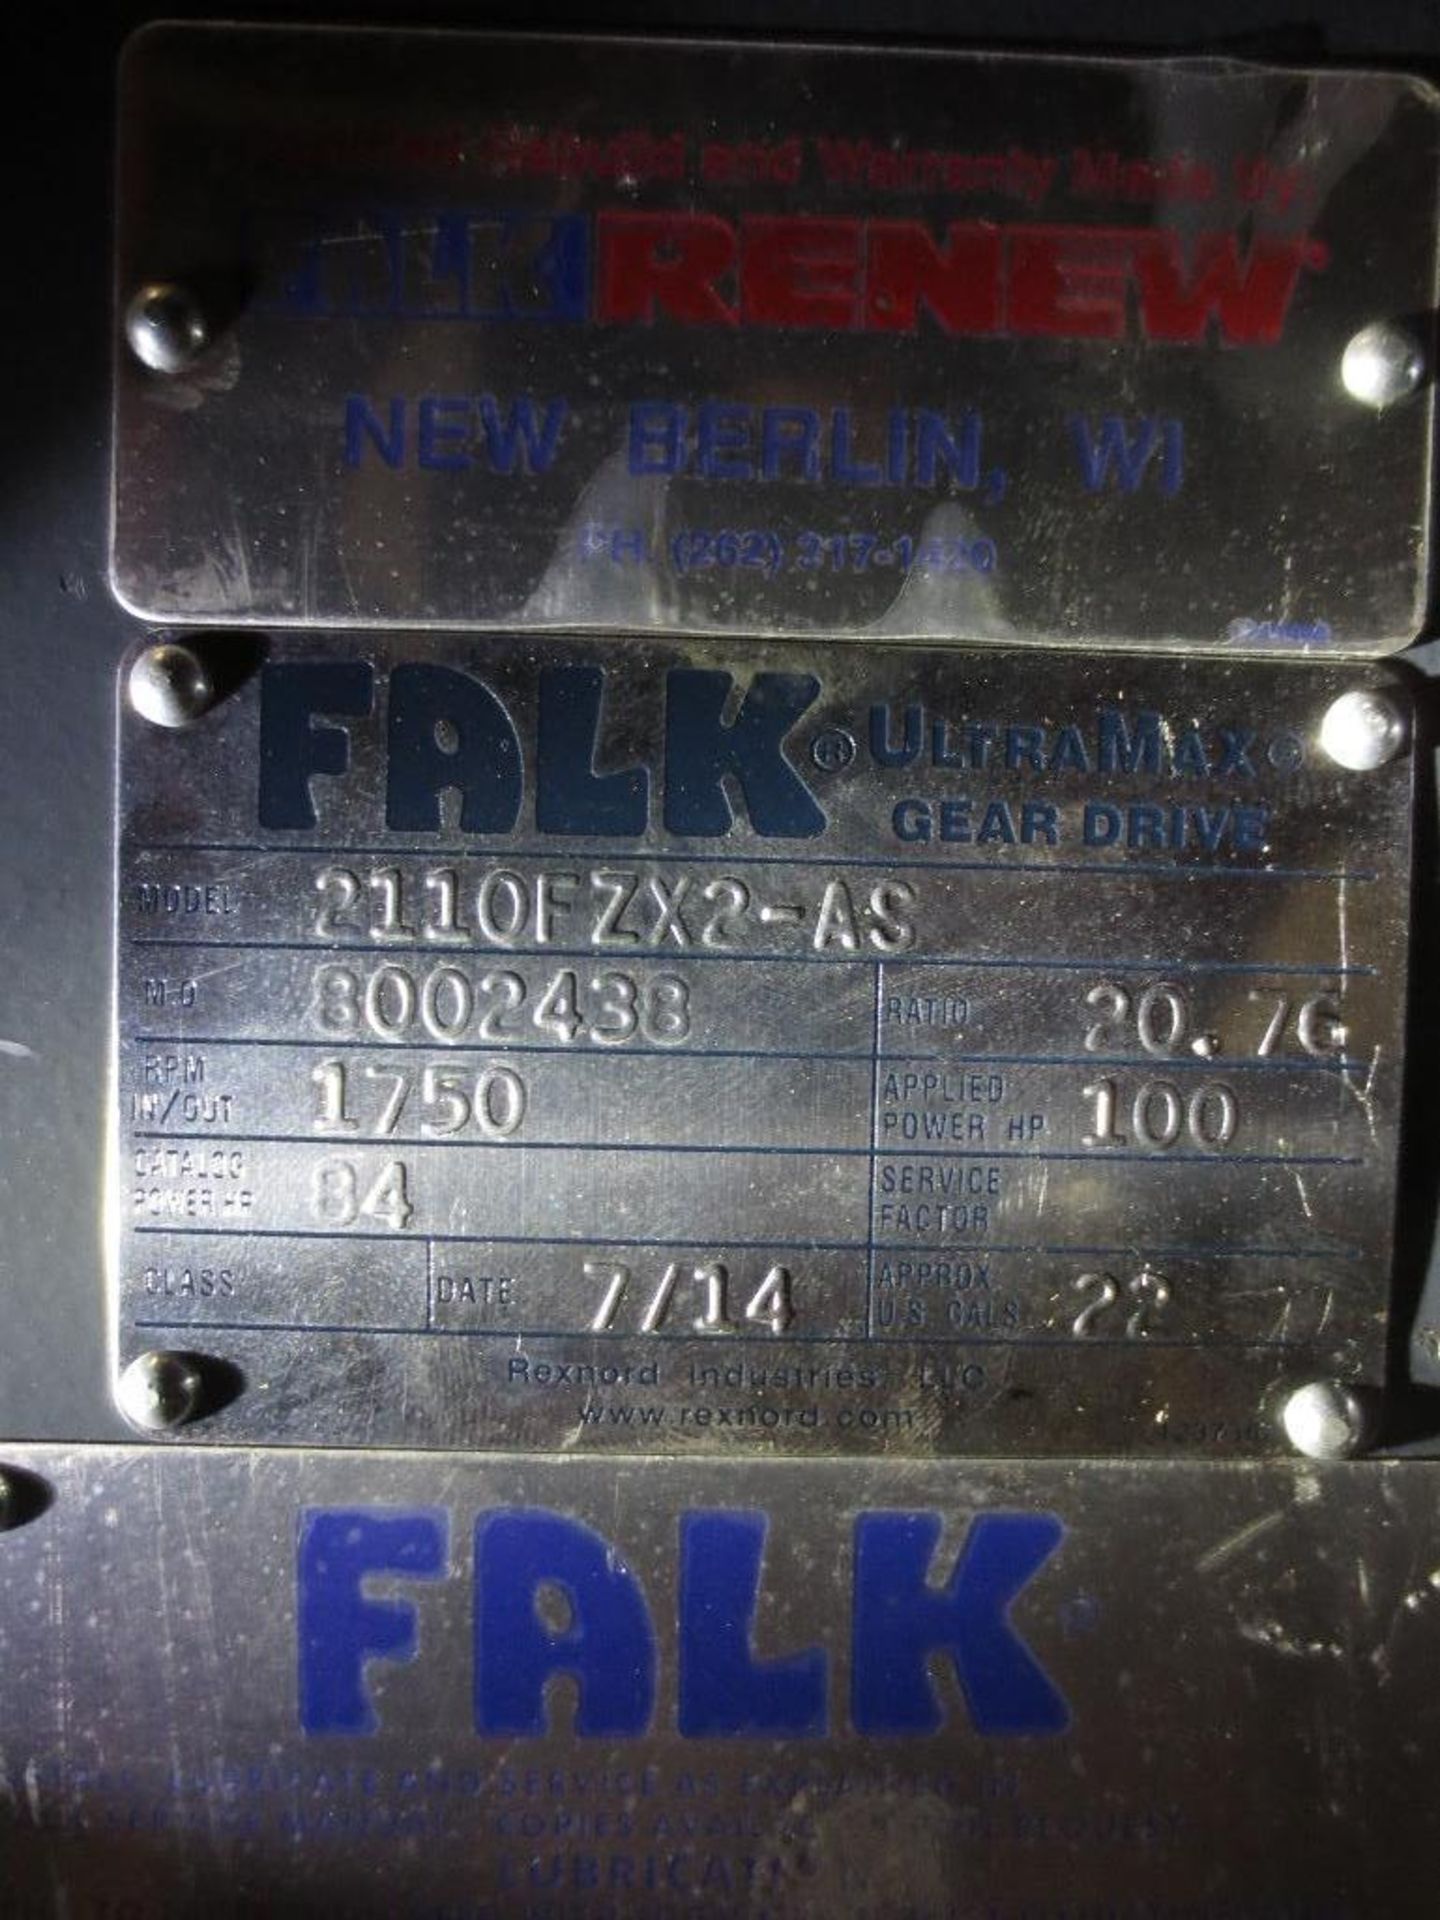 Falk Gear Drive M/N 2110FZX2-AS - Image 5 of 6